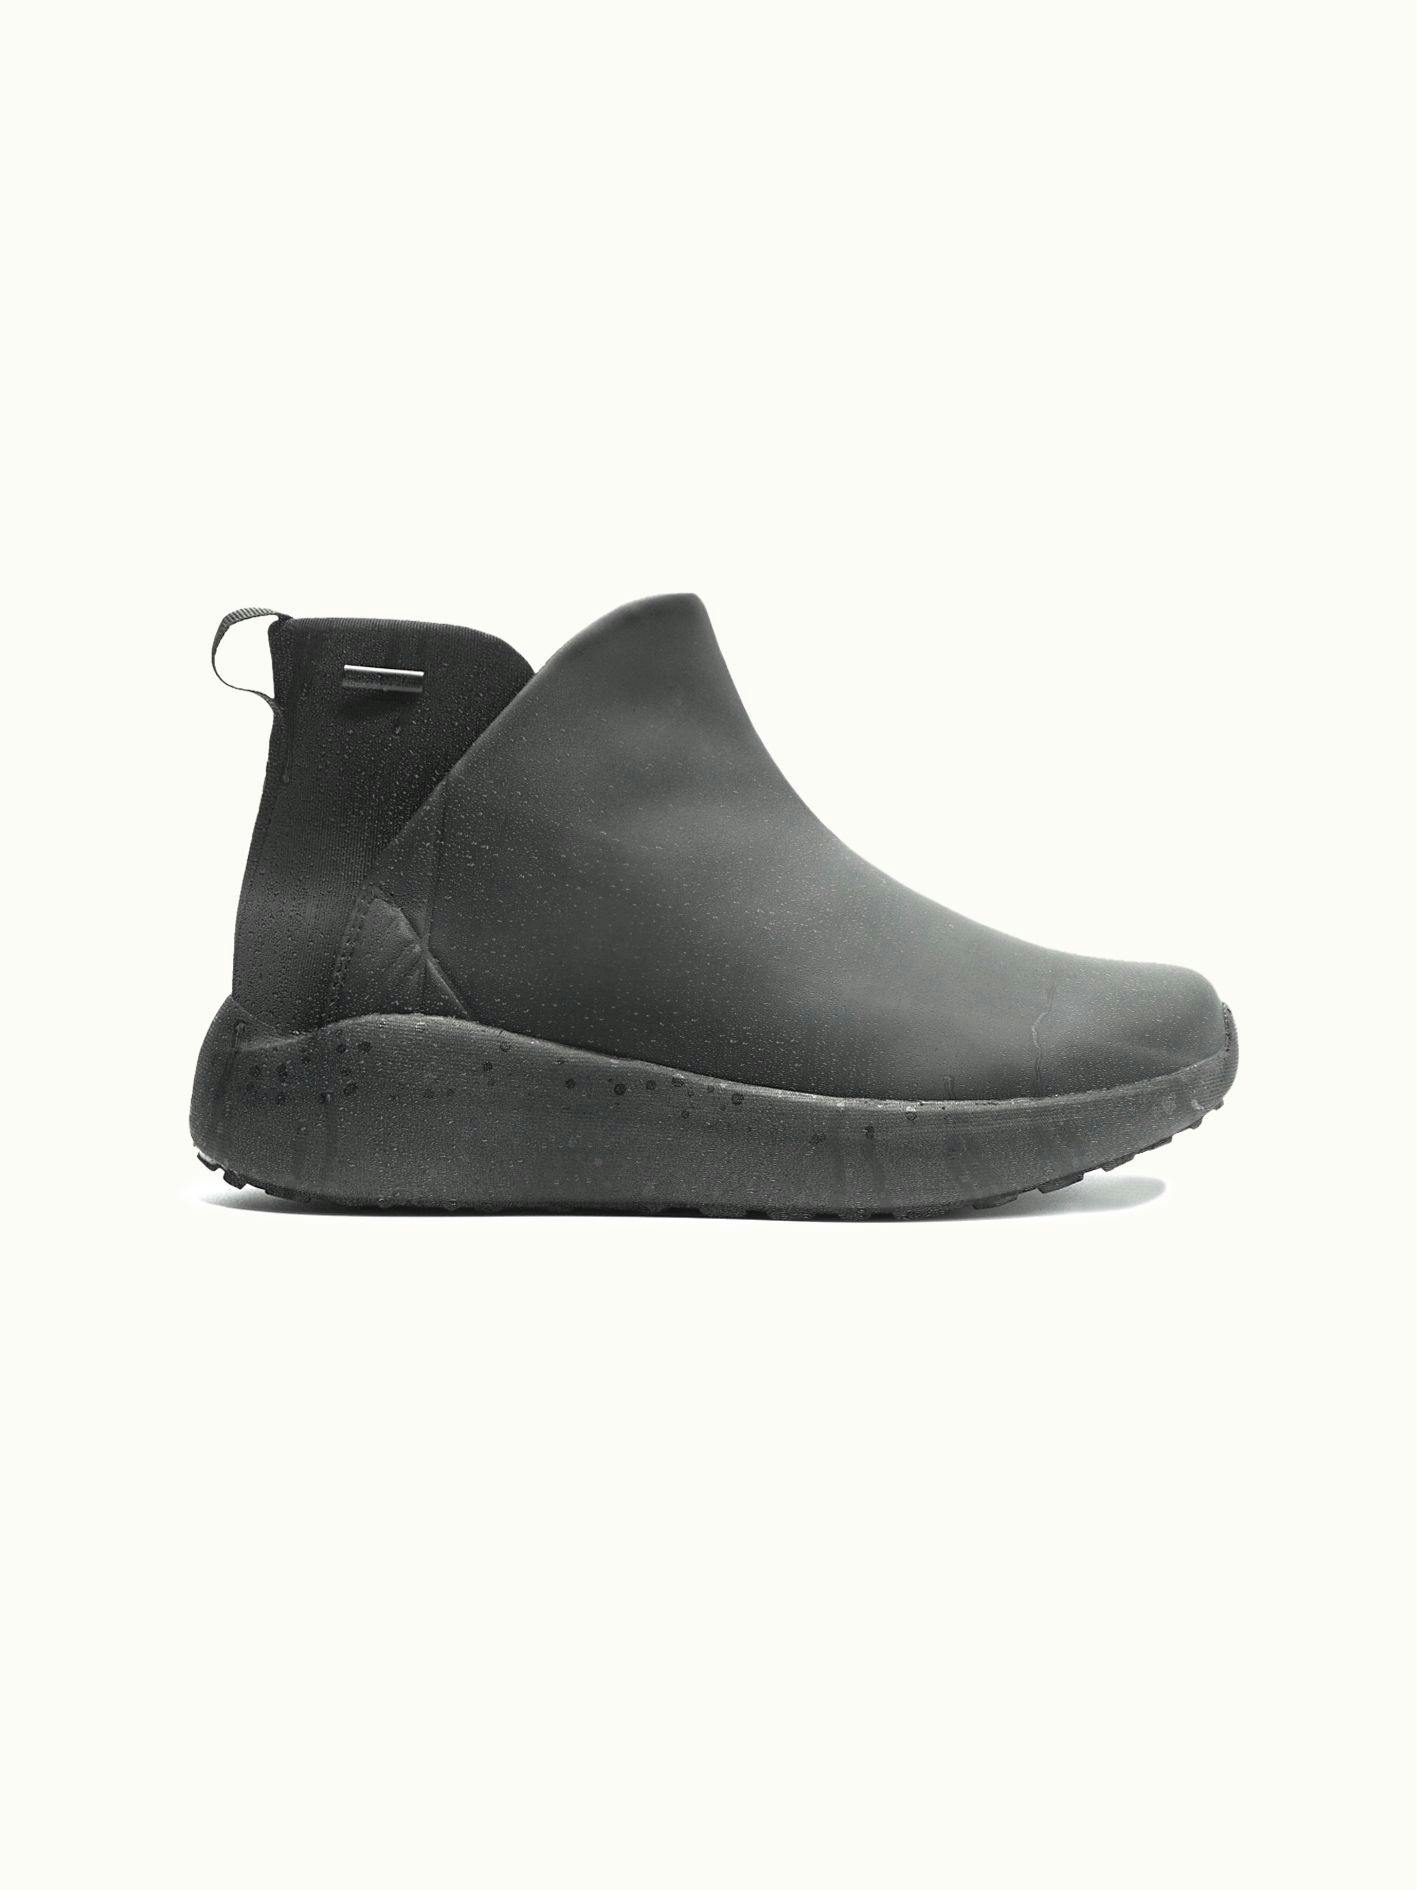 Røros Terrain ankle boots feature waterproof PU and a terrain sole for modern comfort and protection against the elements.